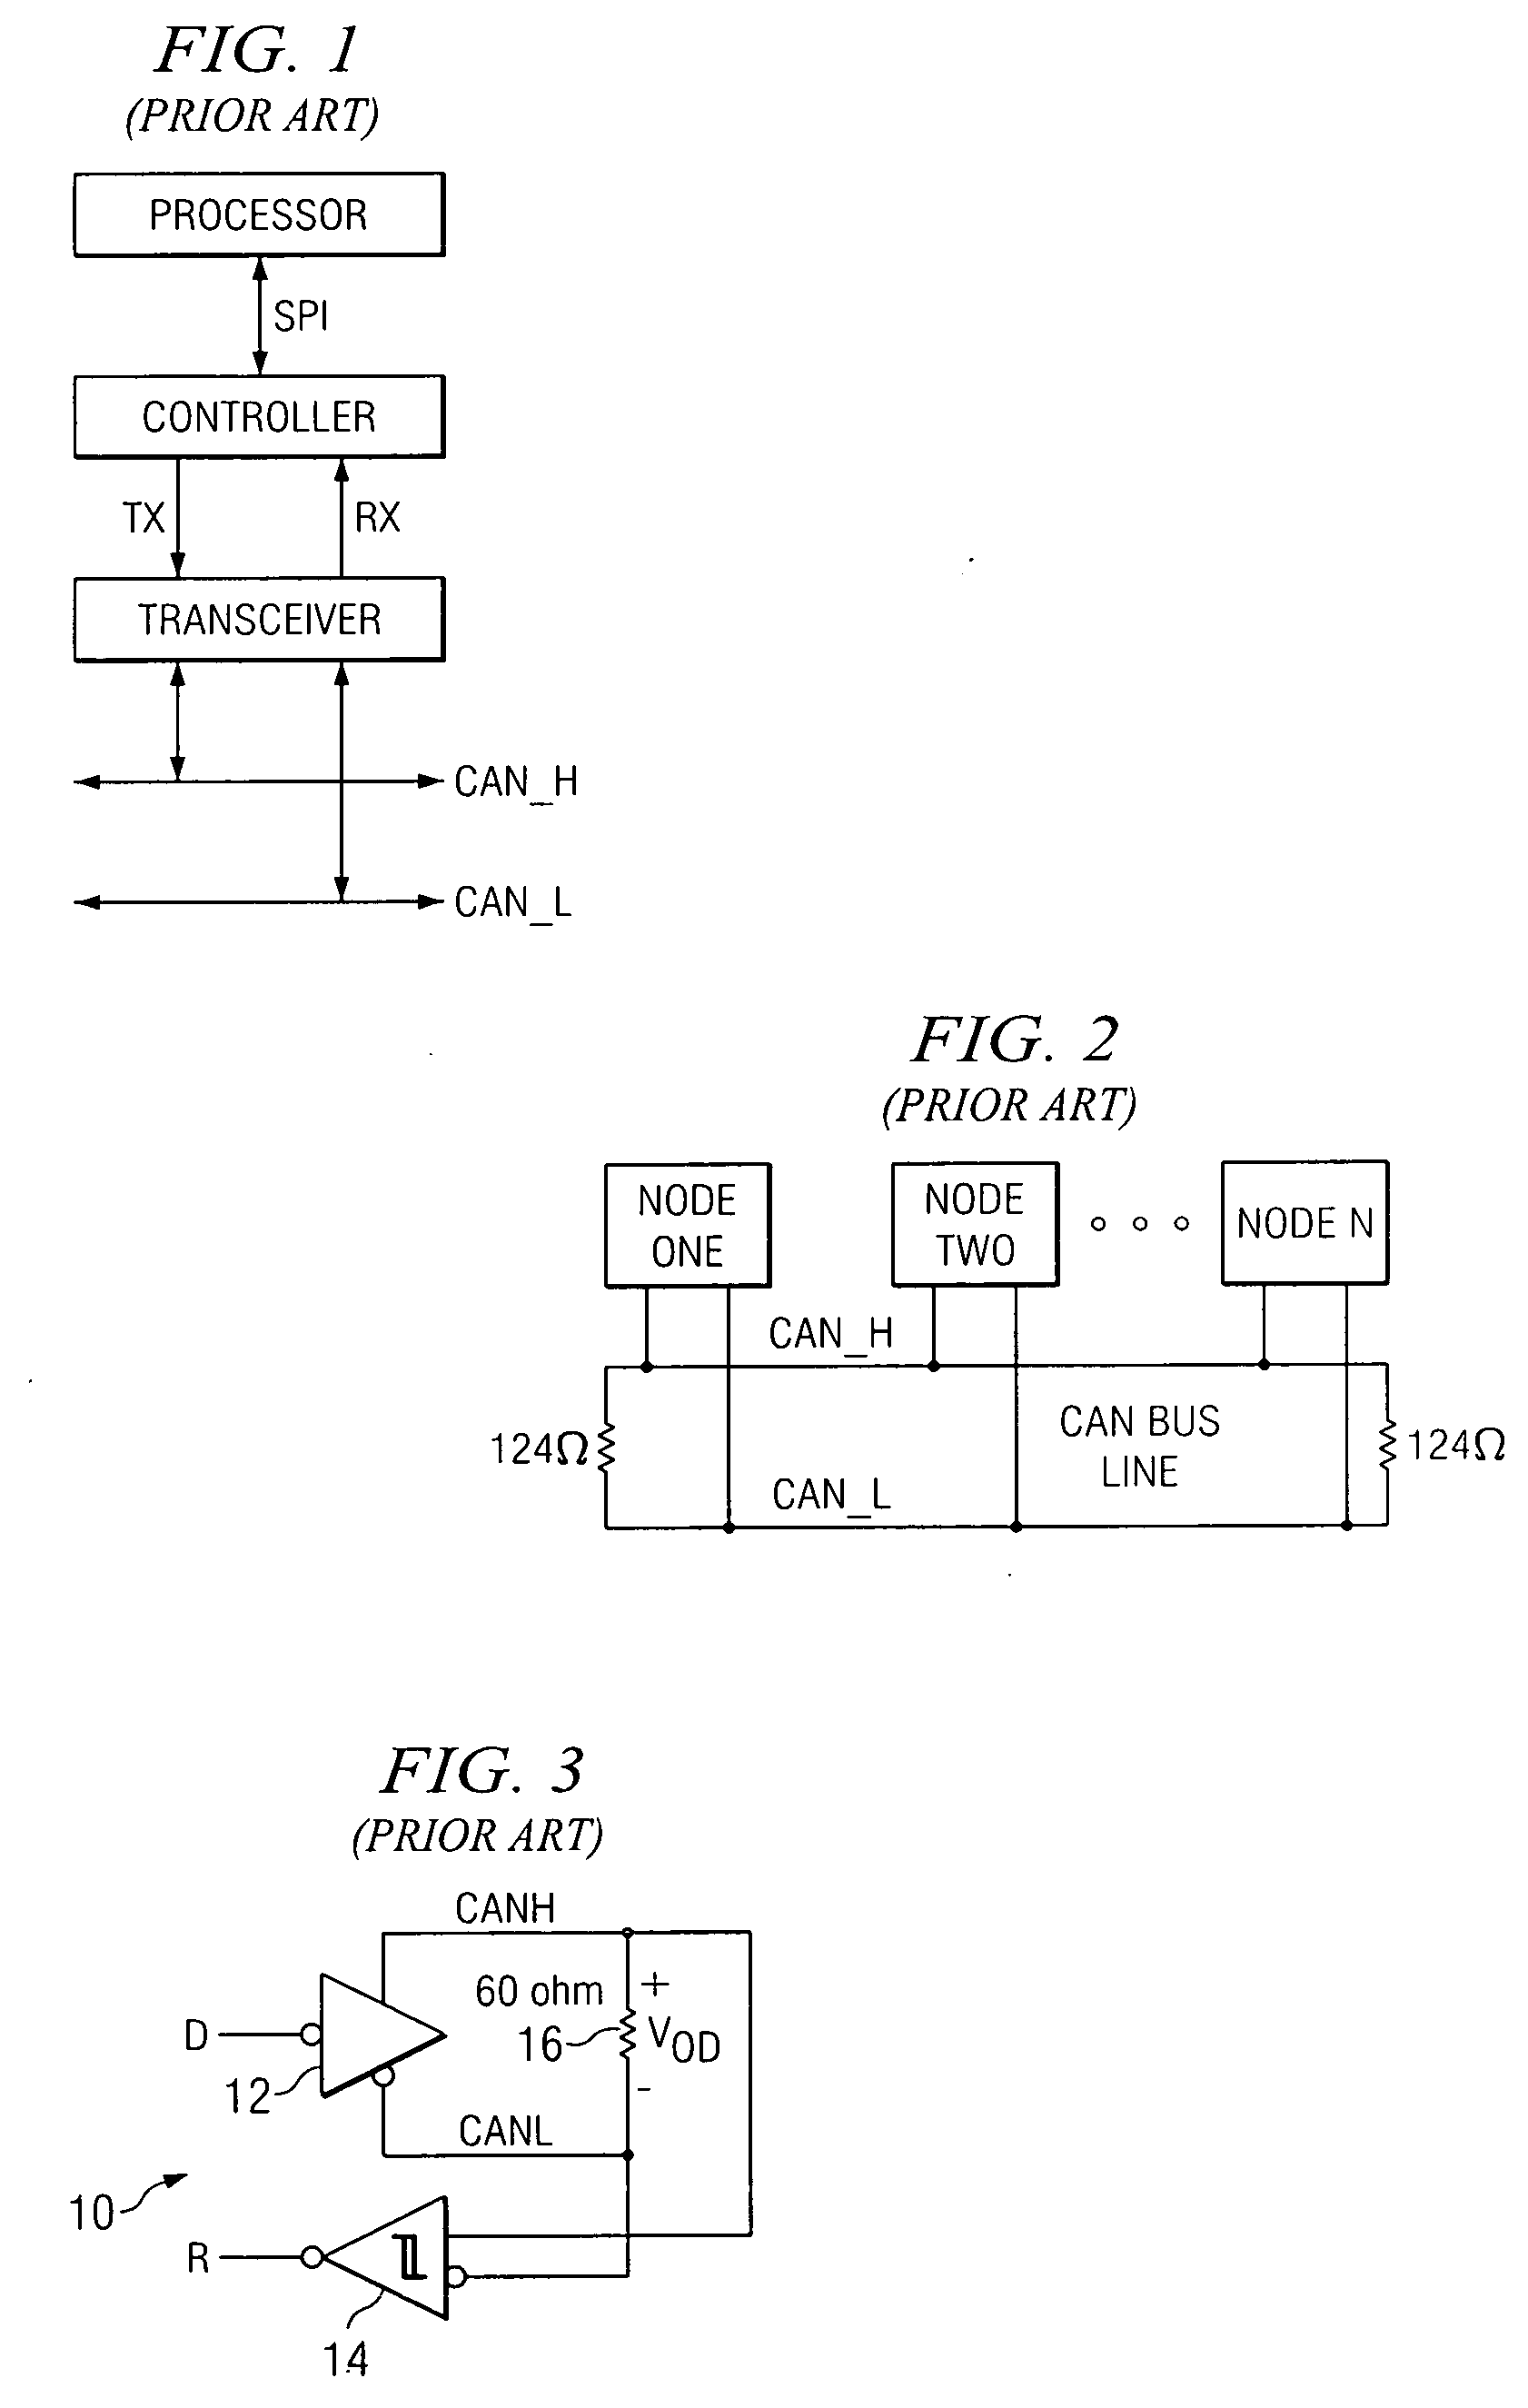 High speed controller area network receiver having improved EMI immunity